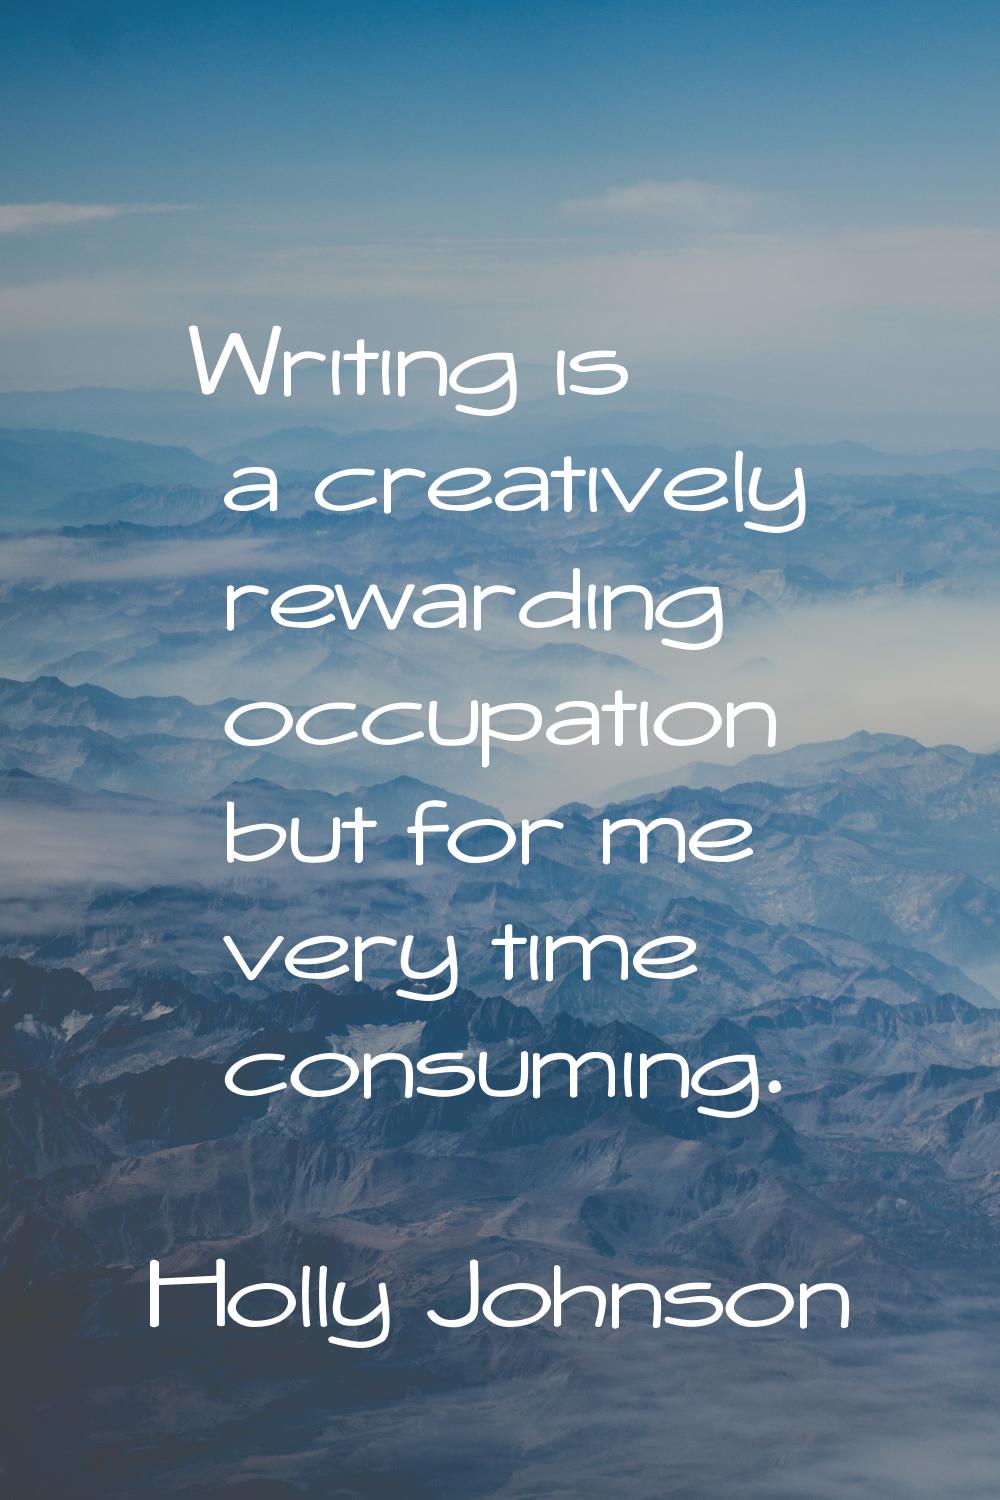 Writing is a creatively rewarding occupation but for me very time consuming.